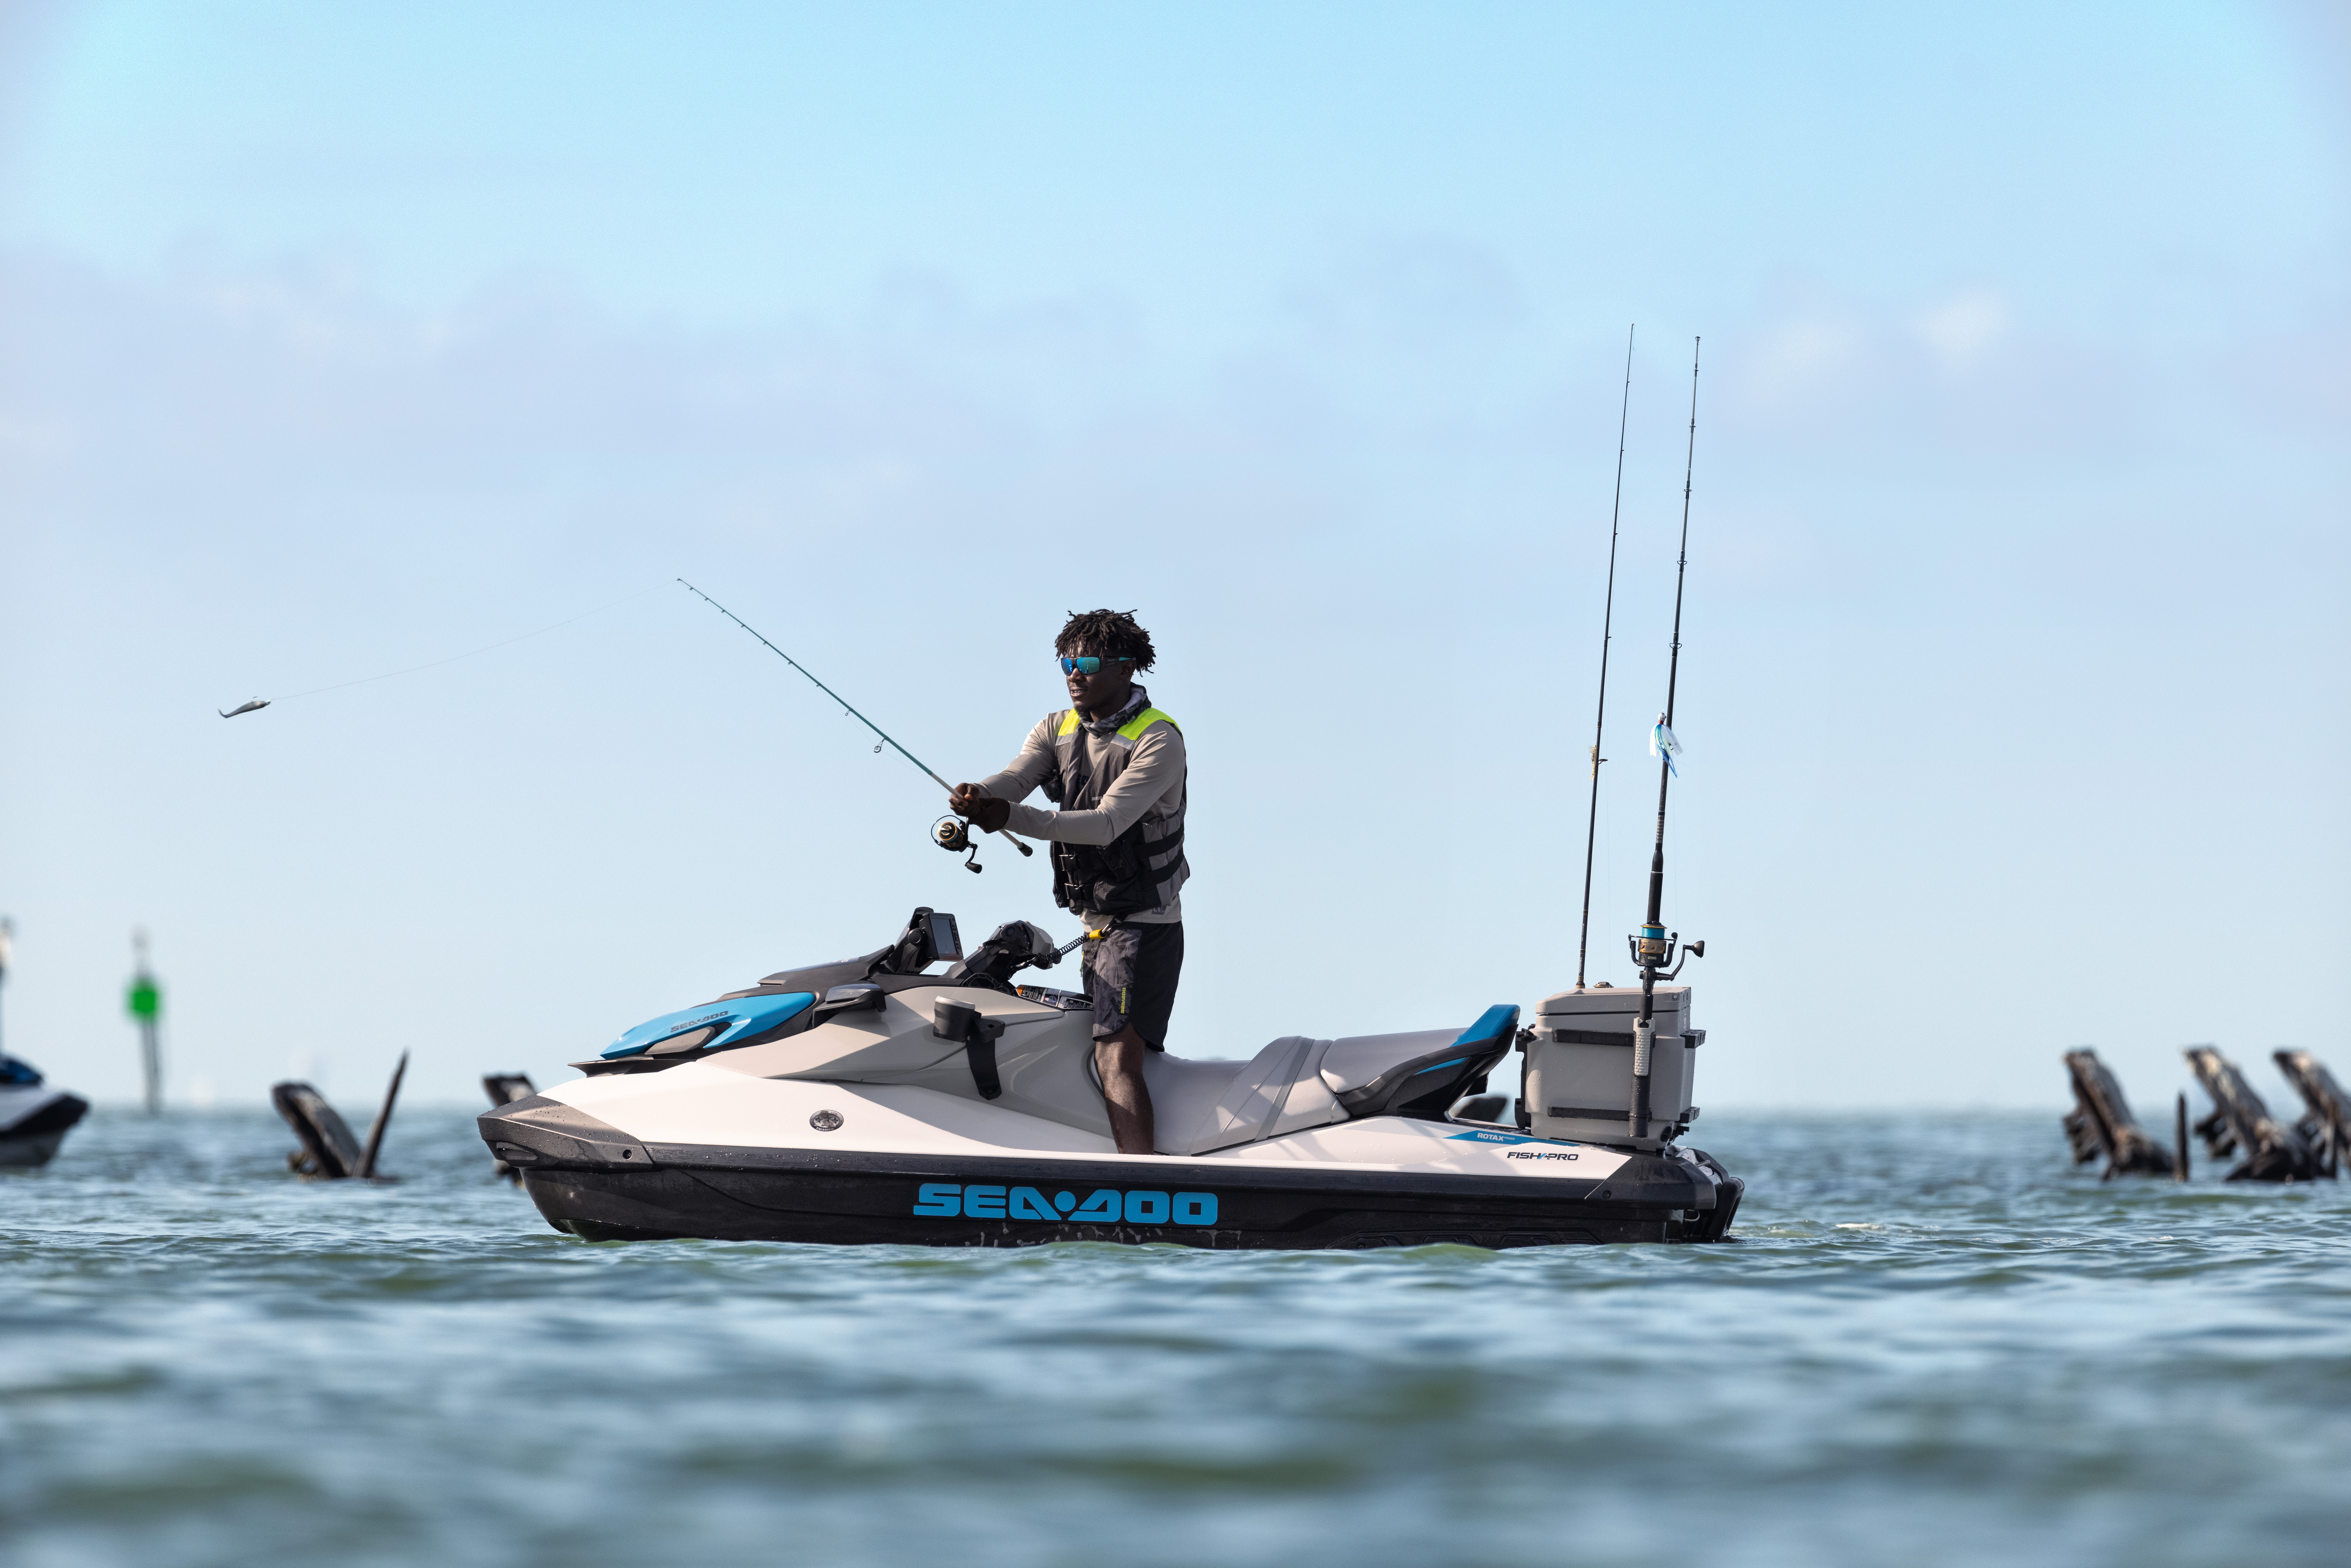 FISHING ON ANOTHER LEVEL WITH THE ALL-NEW 2022 SEA-DOO FISH PRO FAMILY